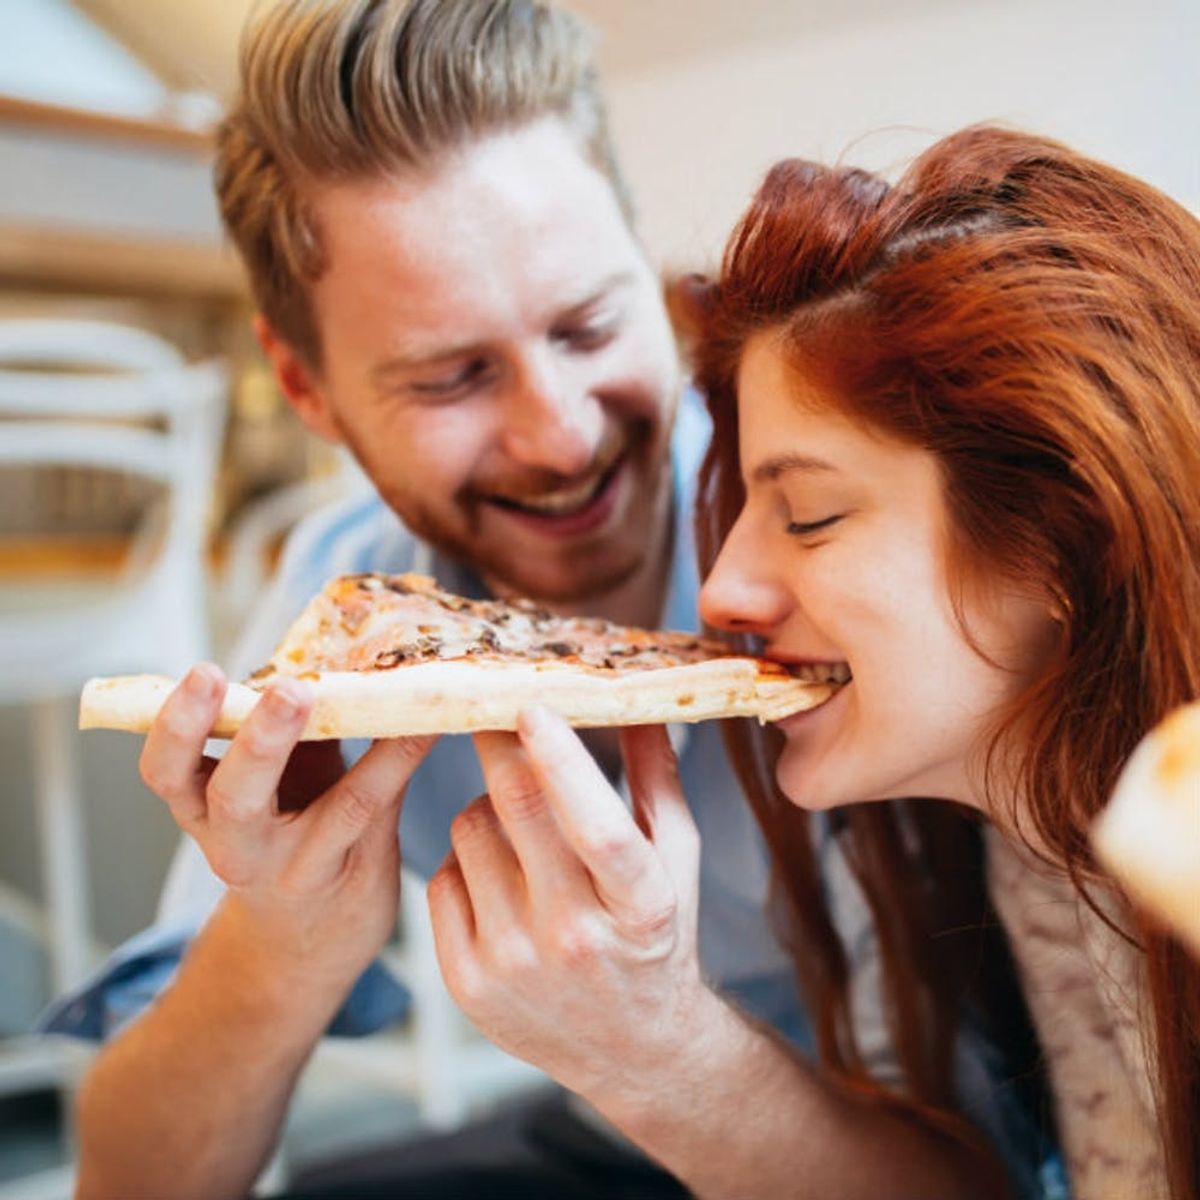 Study Says What You Eat Can Make You More Attractive